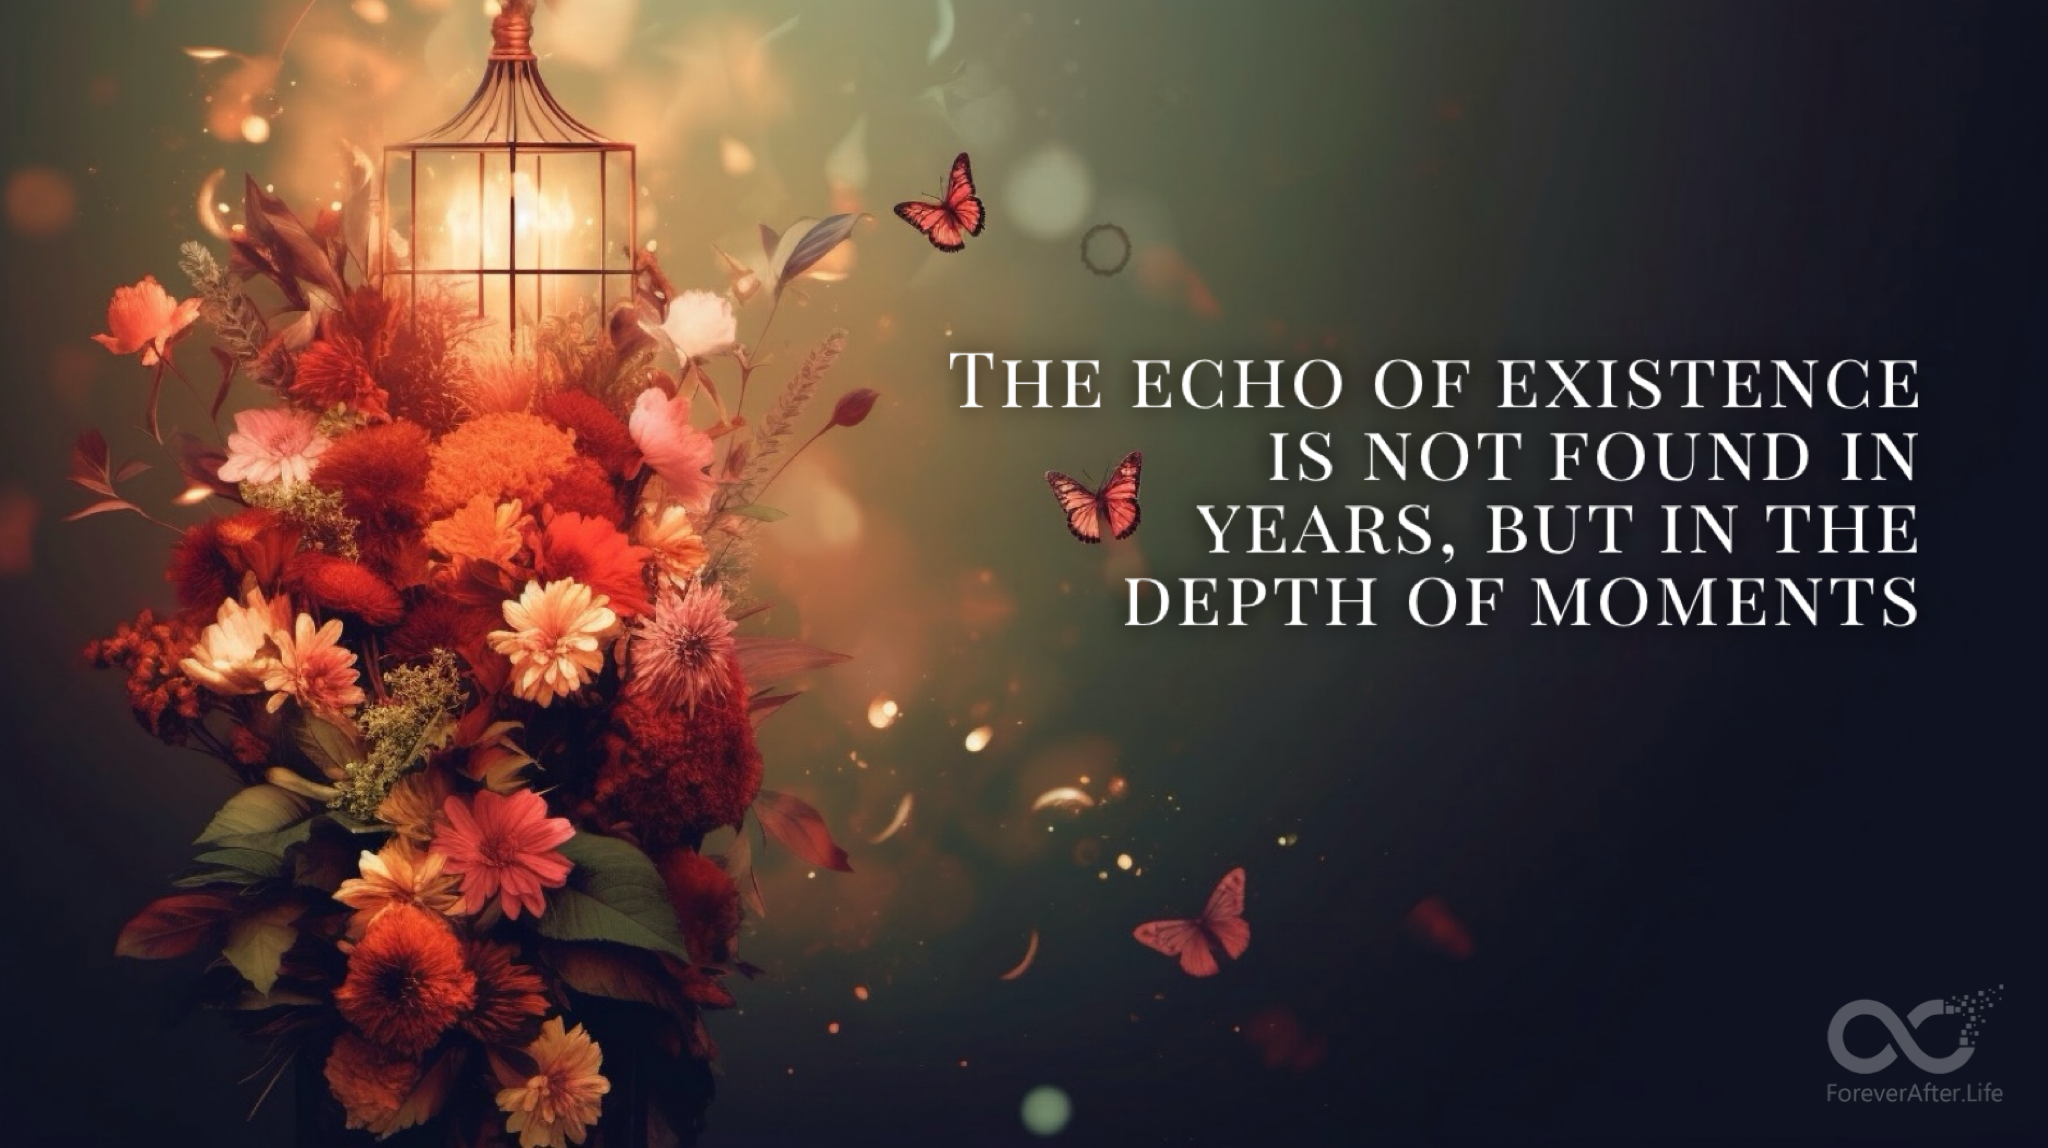 The echo of existence is not found in years, but in the depth of moments